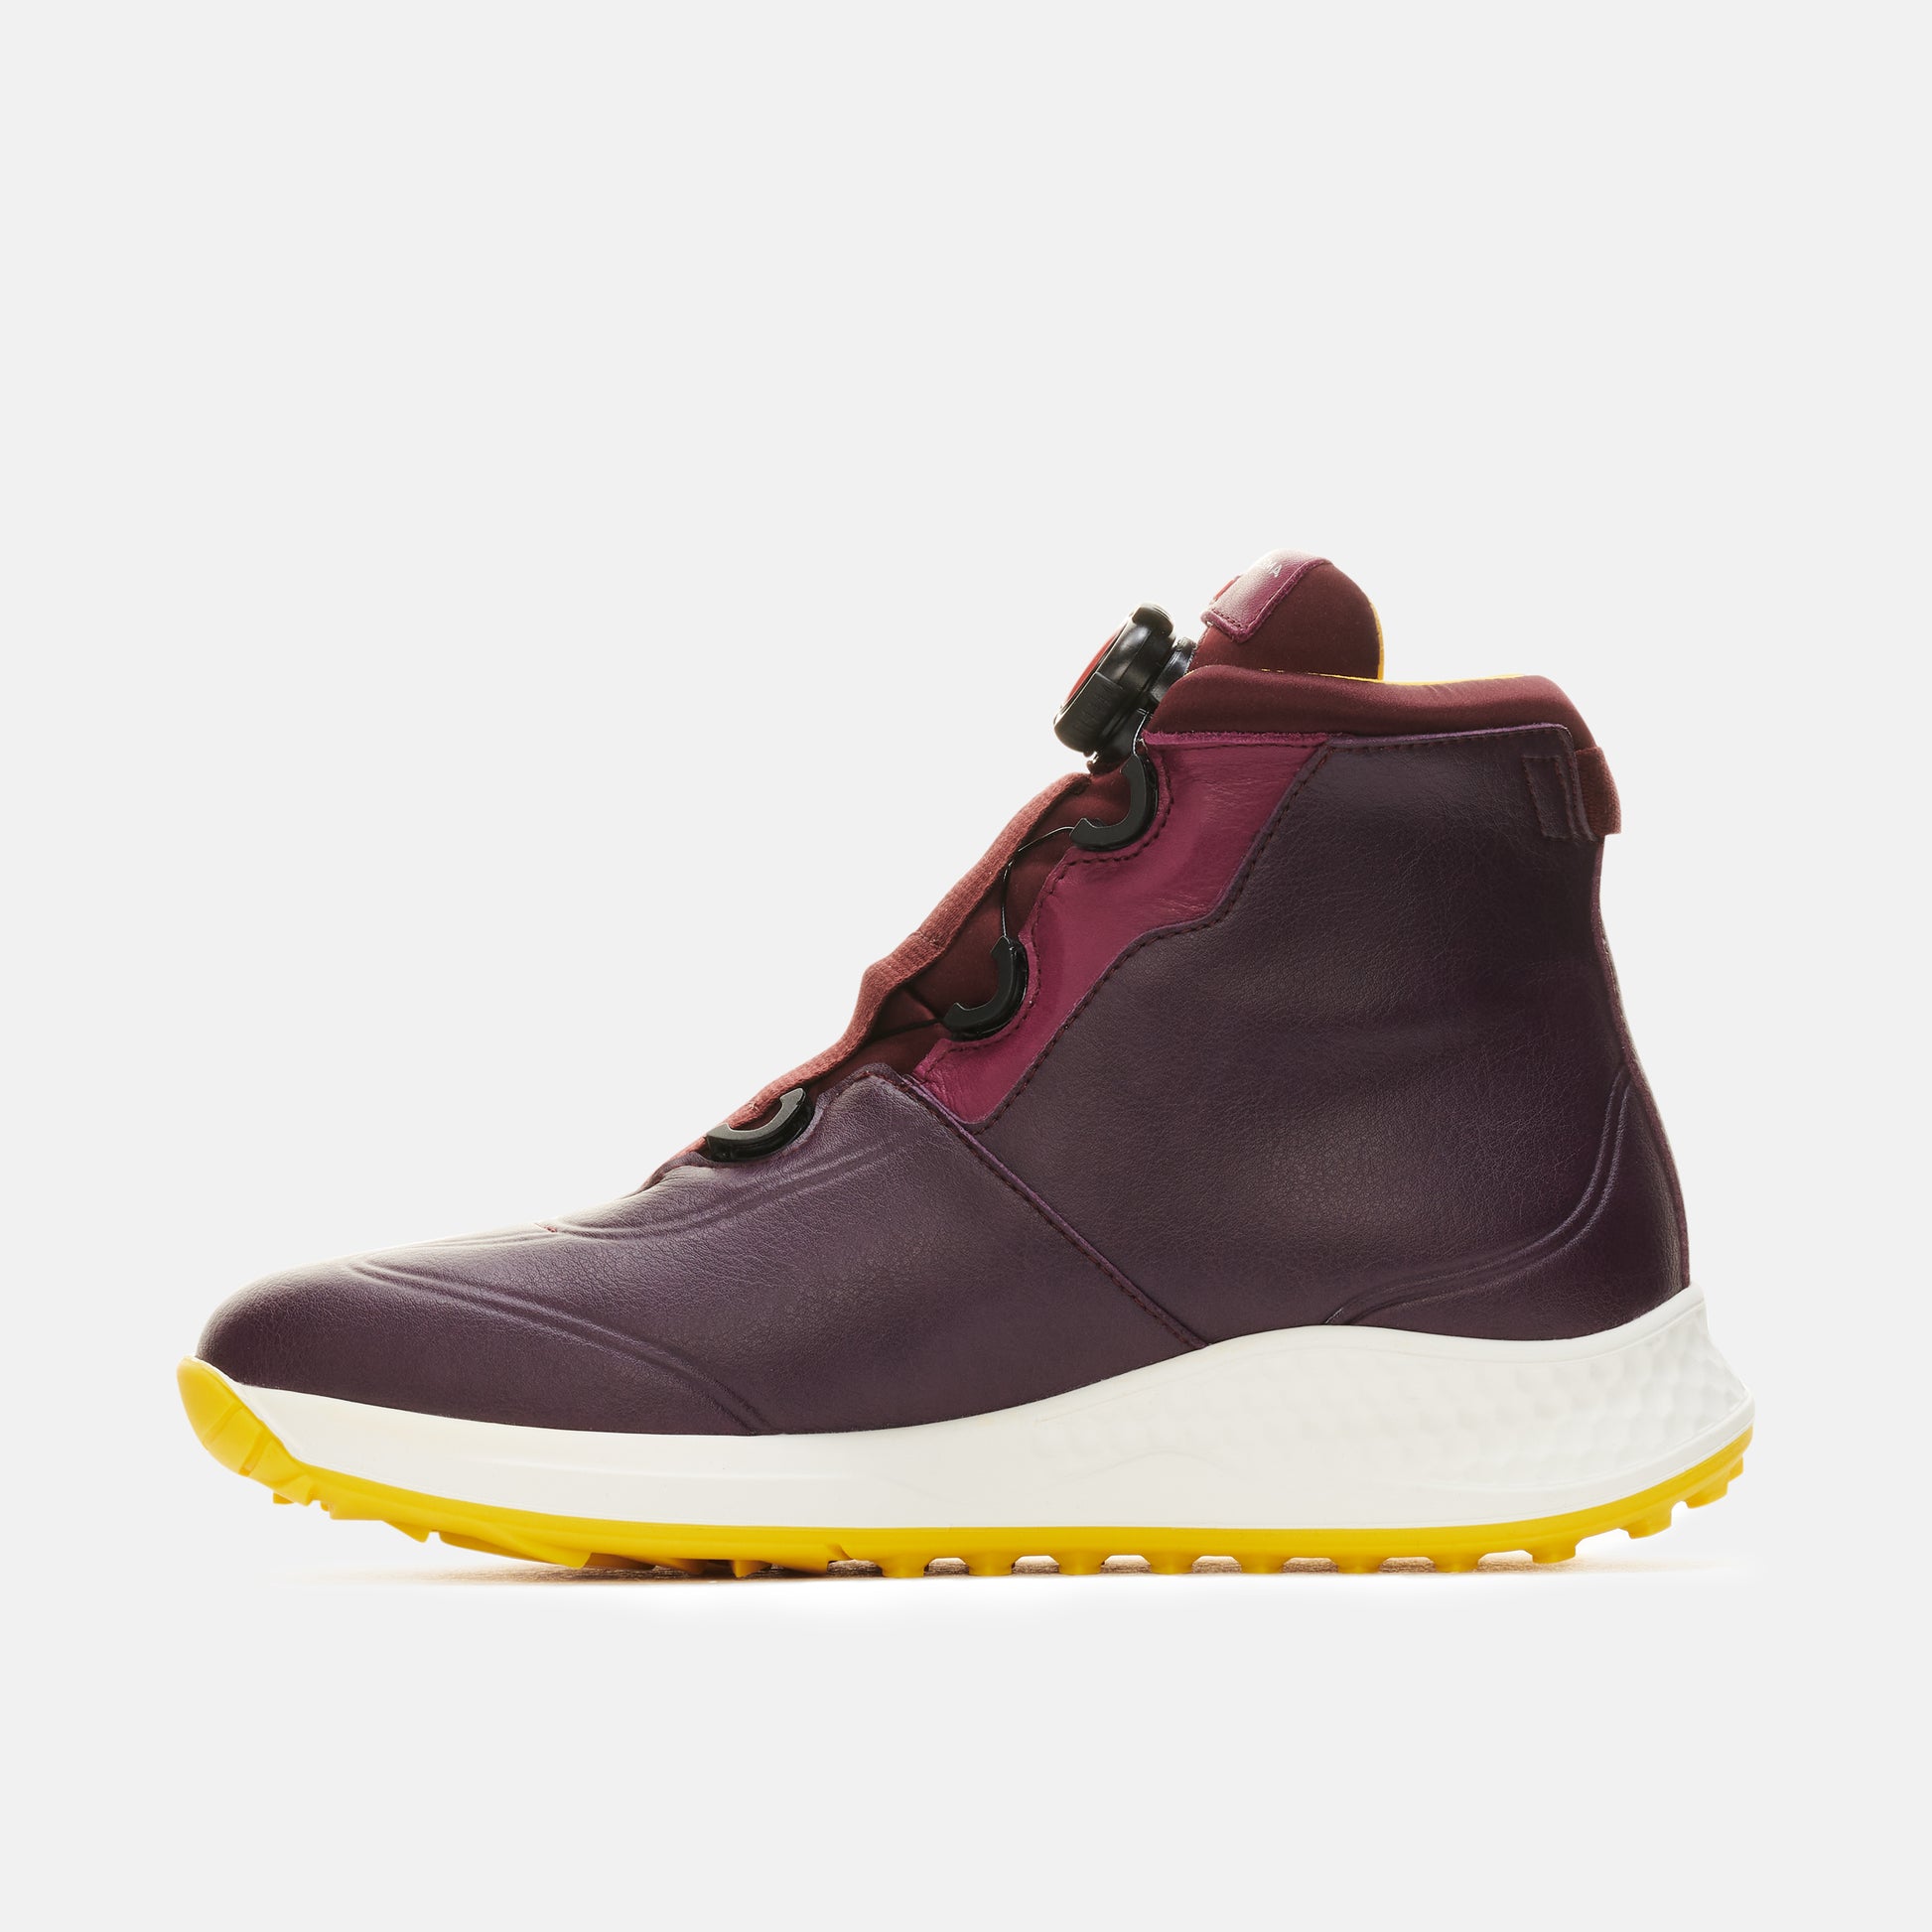 Toscana Purple women's golf shoe is the best winter golf boots for women's and made from Sustainable Microfibre and Leather